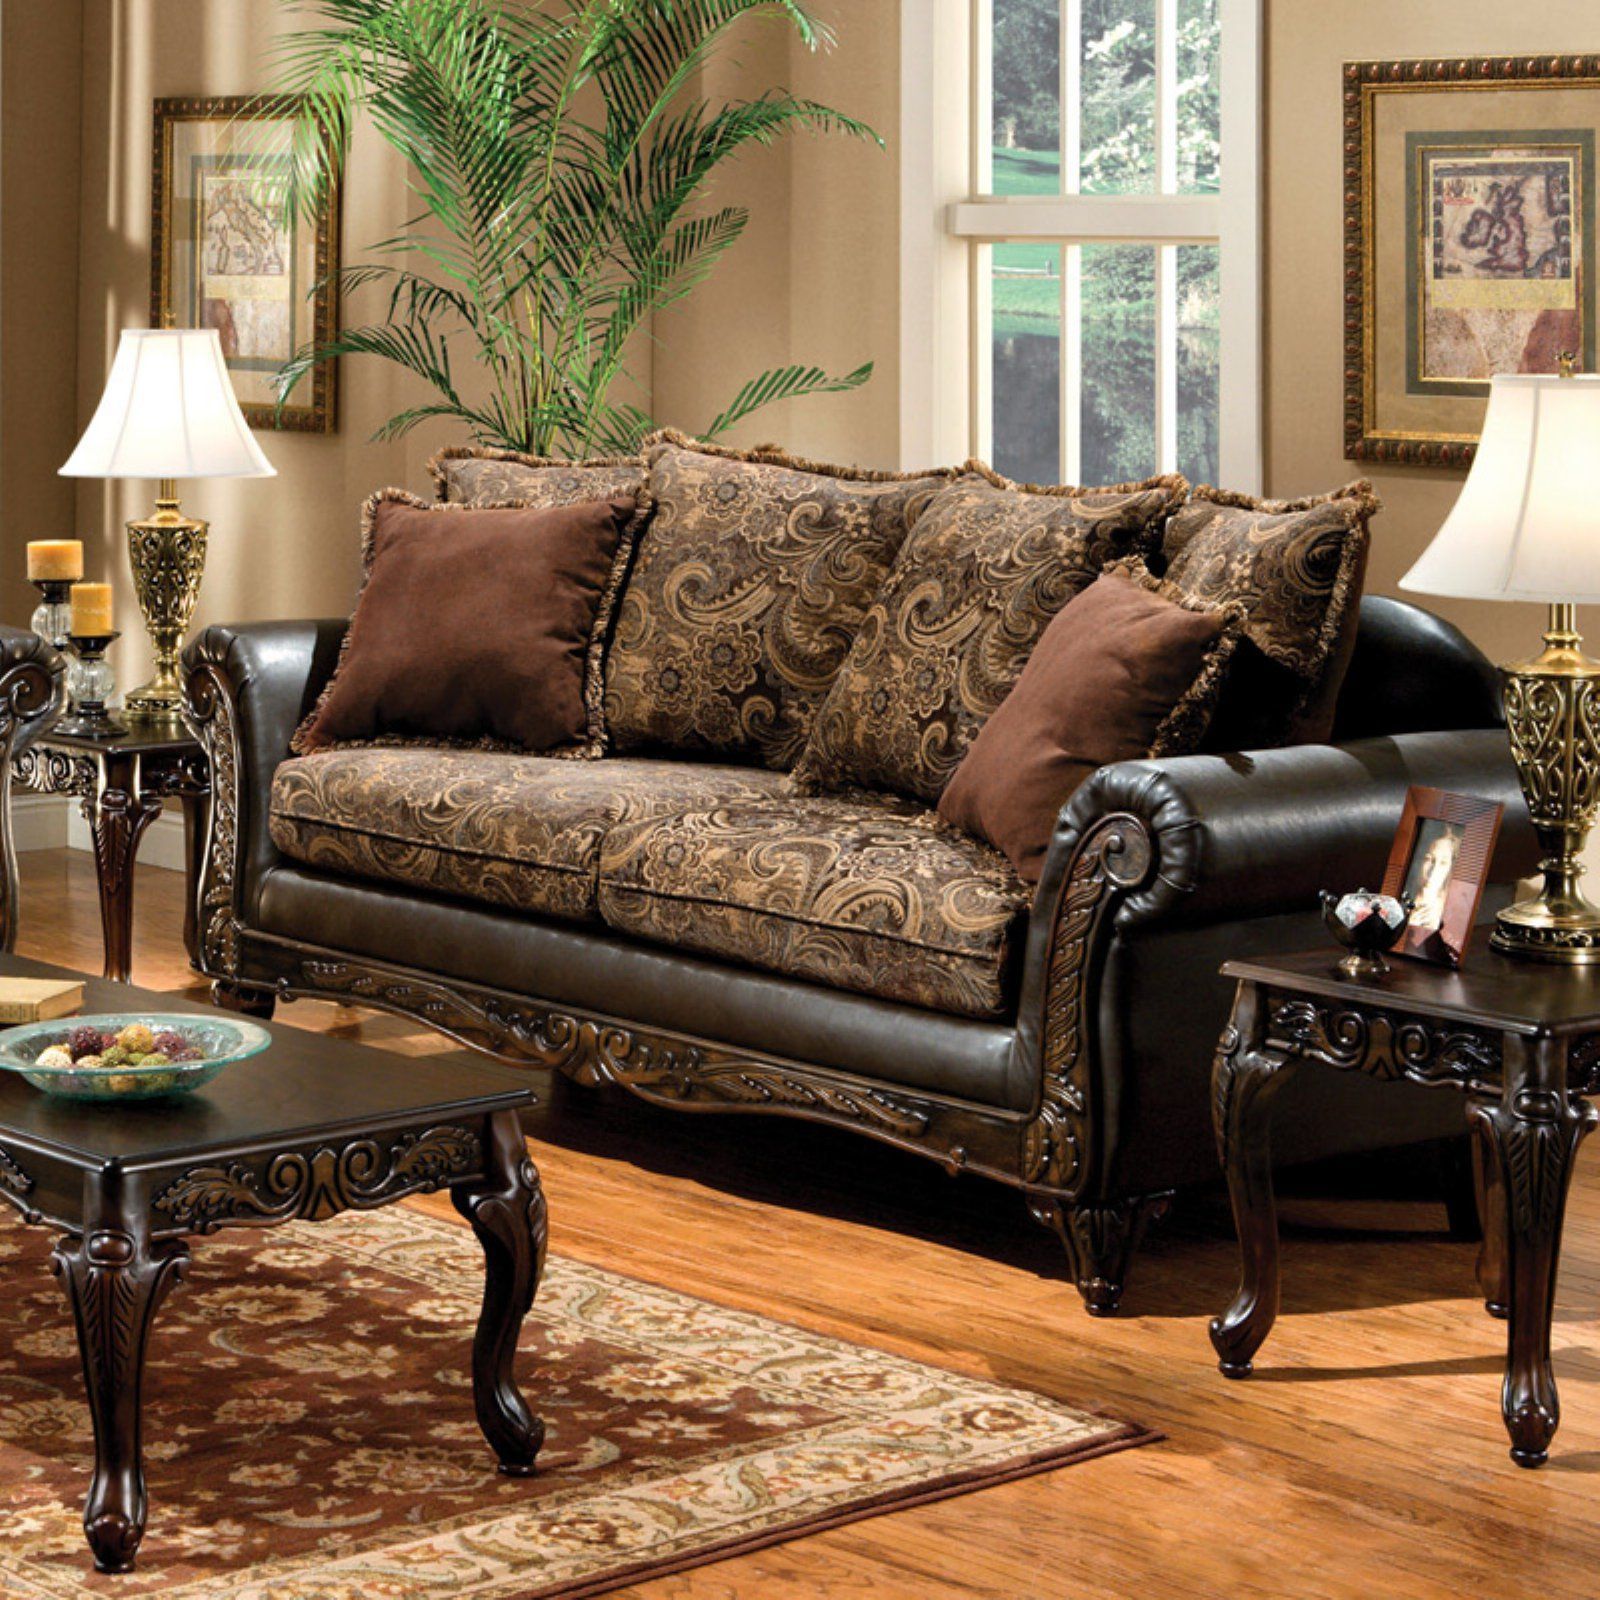 Furniture Of America Doria Fabric And Leatherette Sofa Set – Floral Regarding Sofas In Pattern (View 19 of 20)